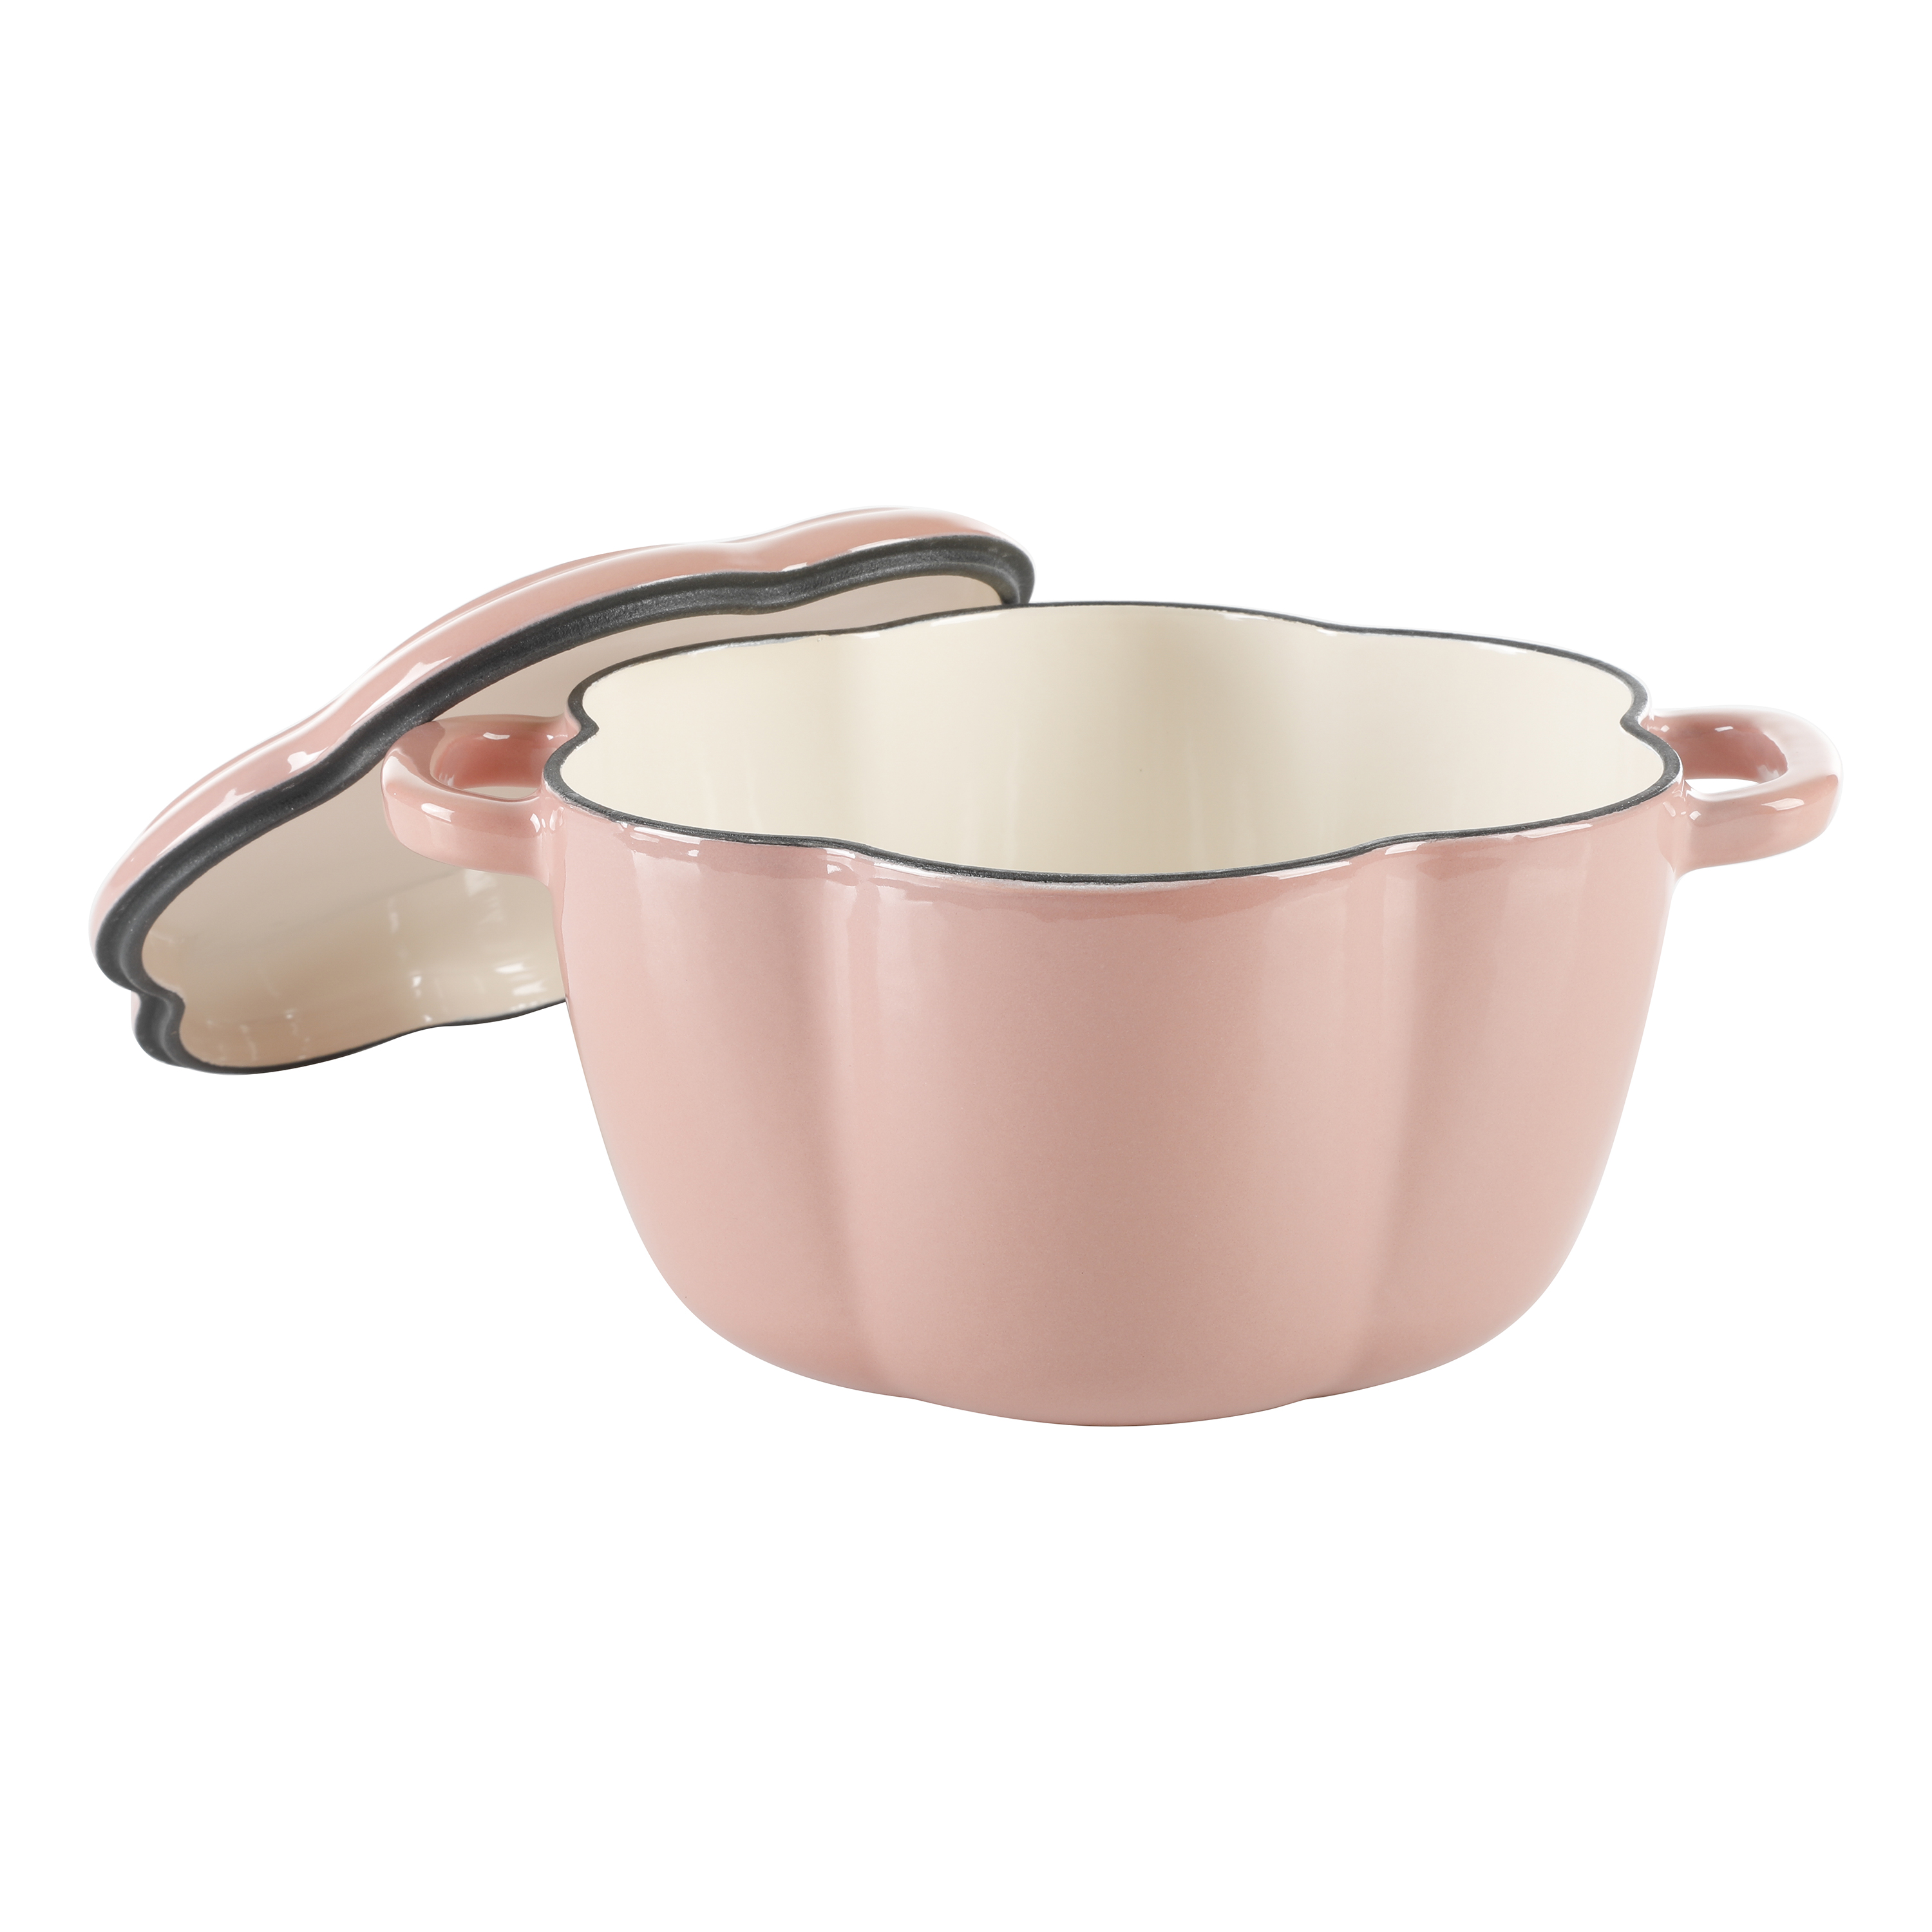 The Pioneer Woman Timeless Beauty Enamel on Cast Iron 3-Quart Dutch Oven, Pink - image 5 of 9